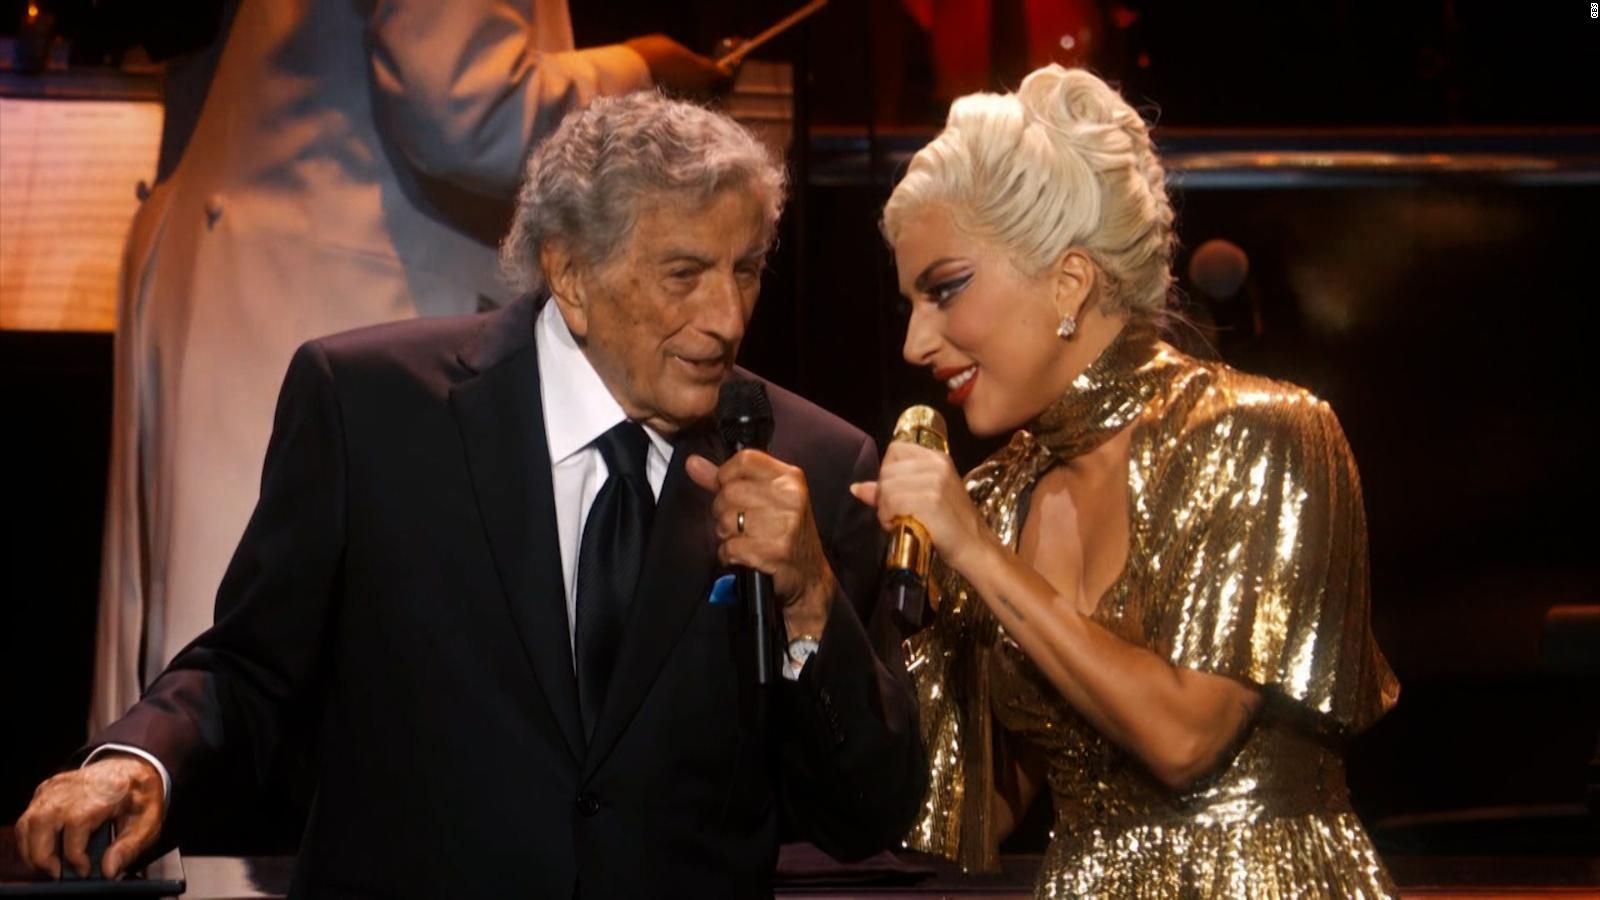 Tony Bennett smiling and singing with Lady Gaga